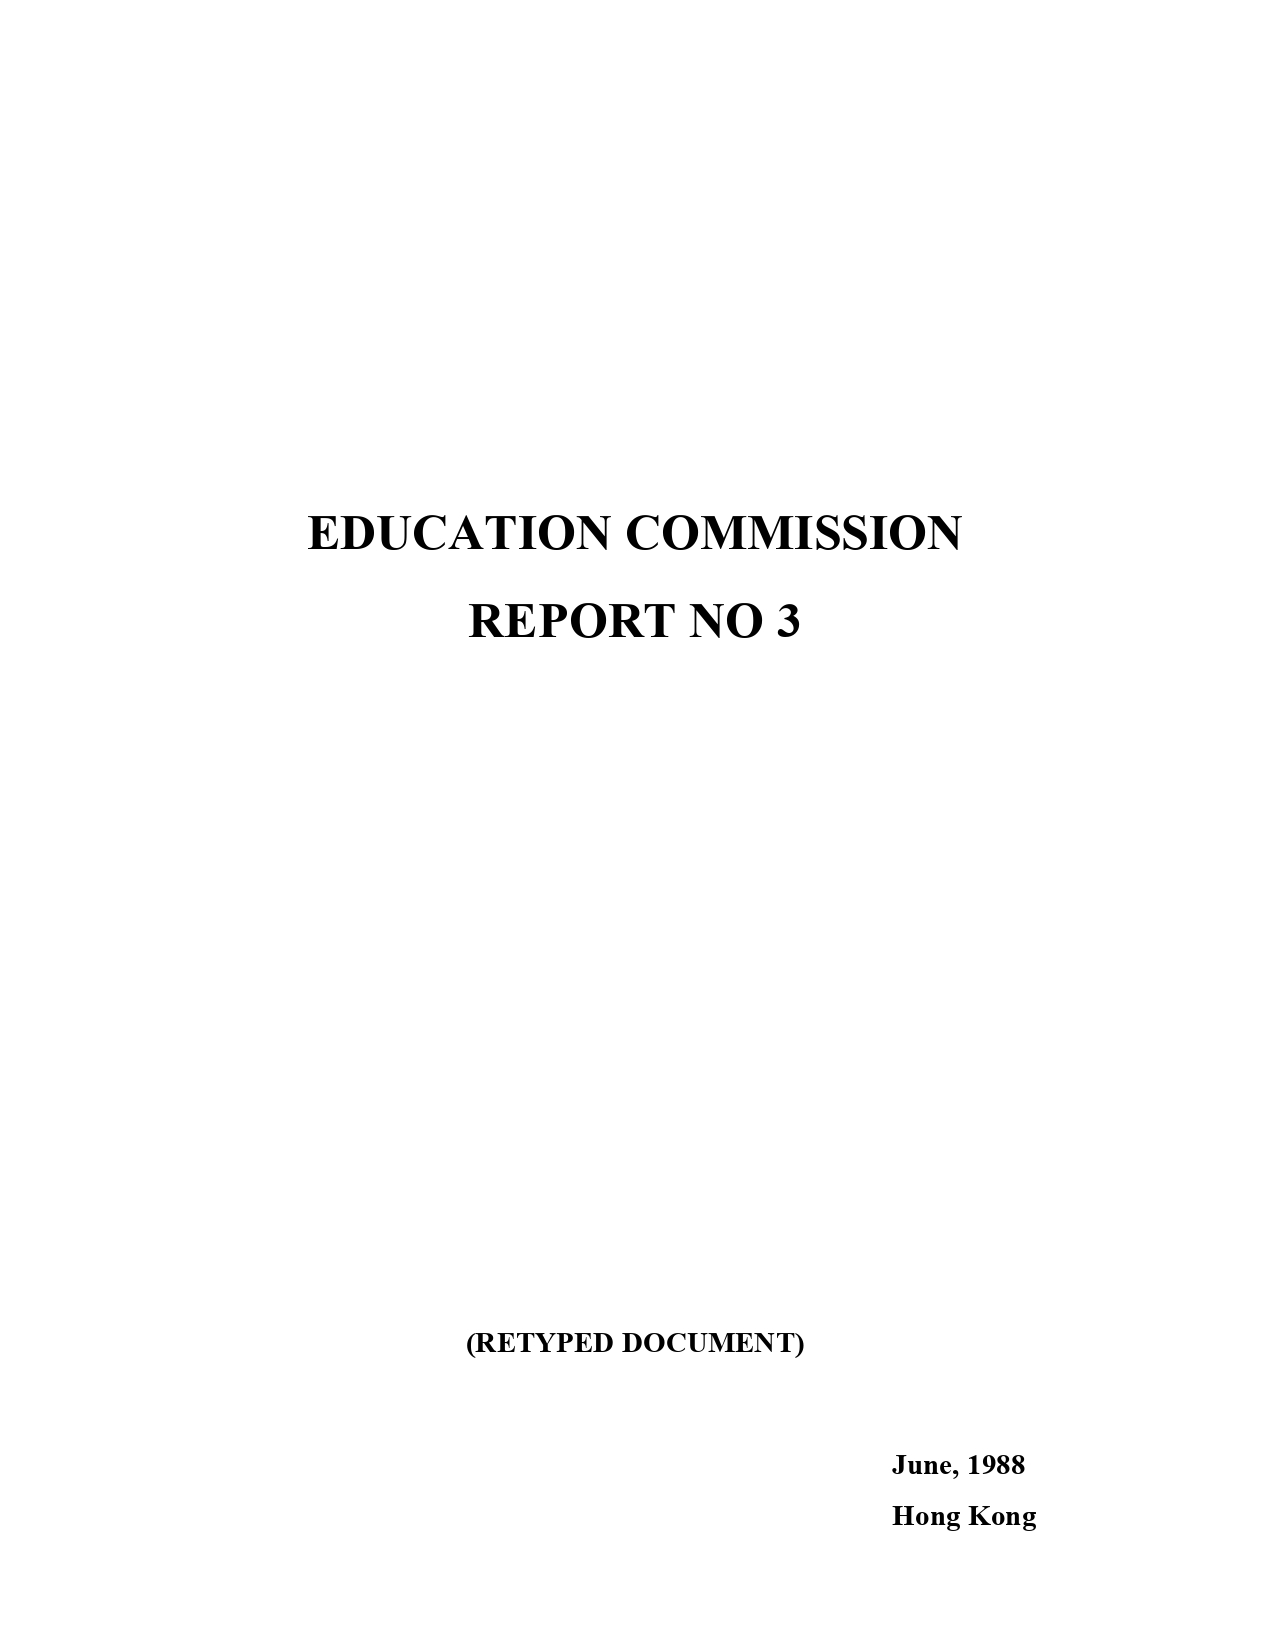 Education Commission Report No. 3